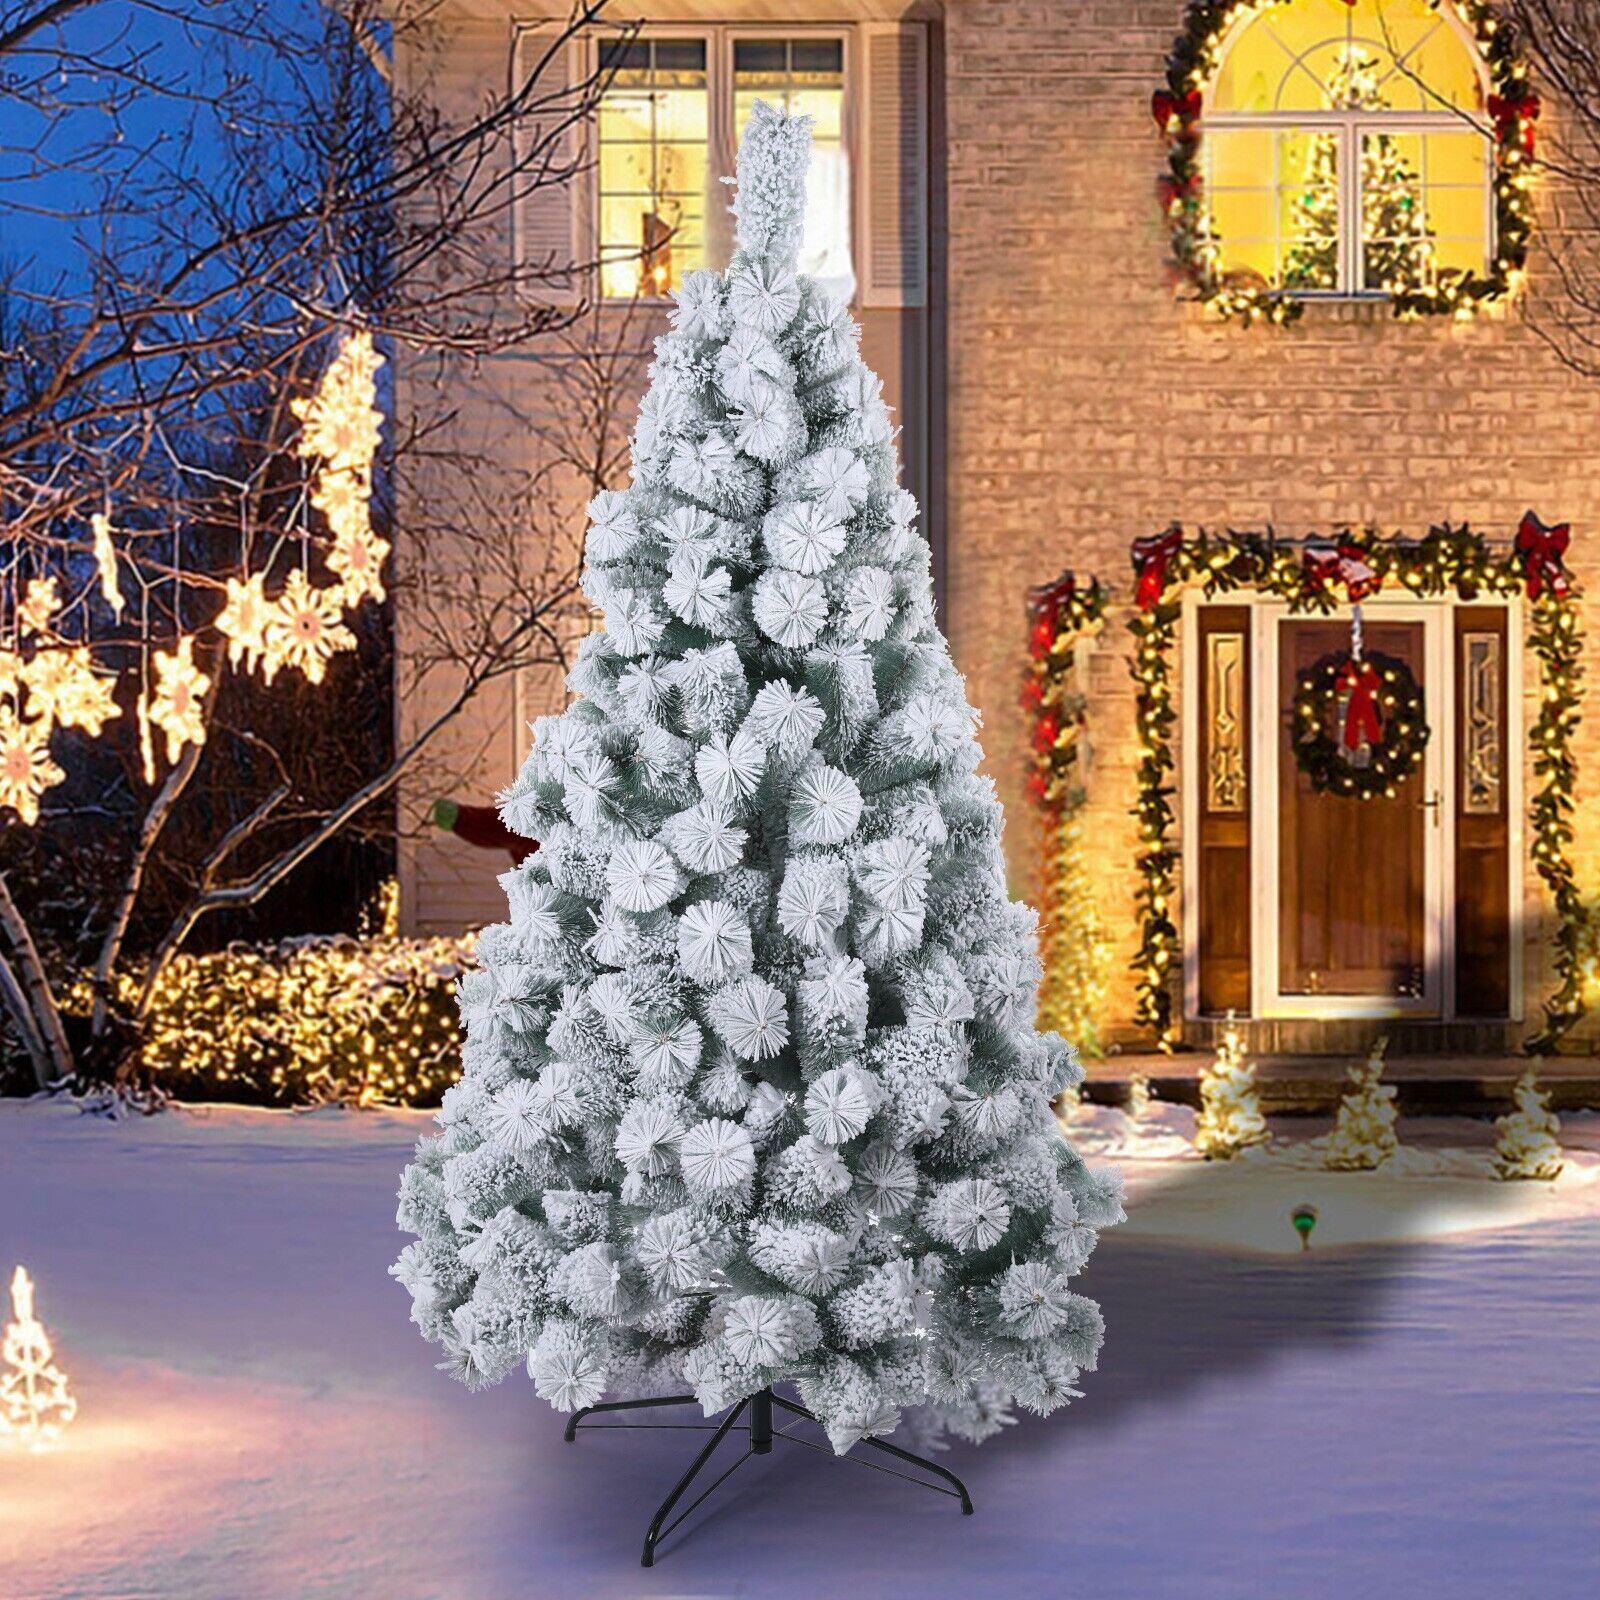 Artificial Christmas Tree 6FT/7FT Flocking Pine Needle Snow Covered Home Decor